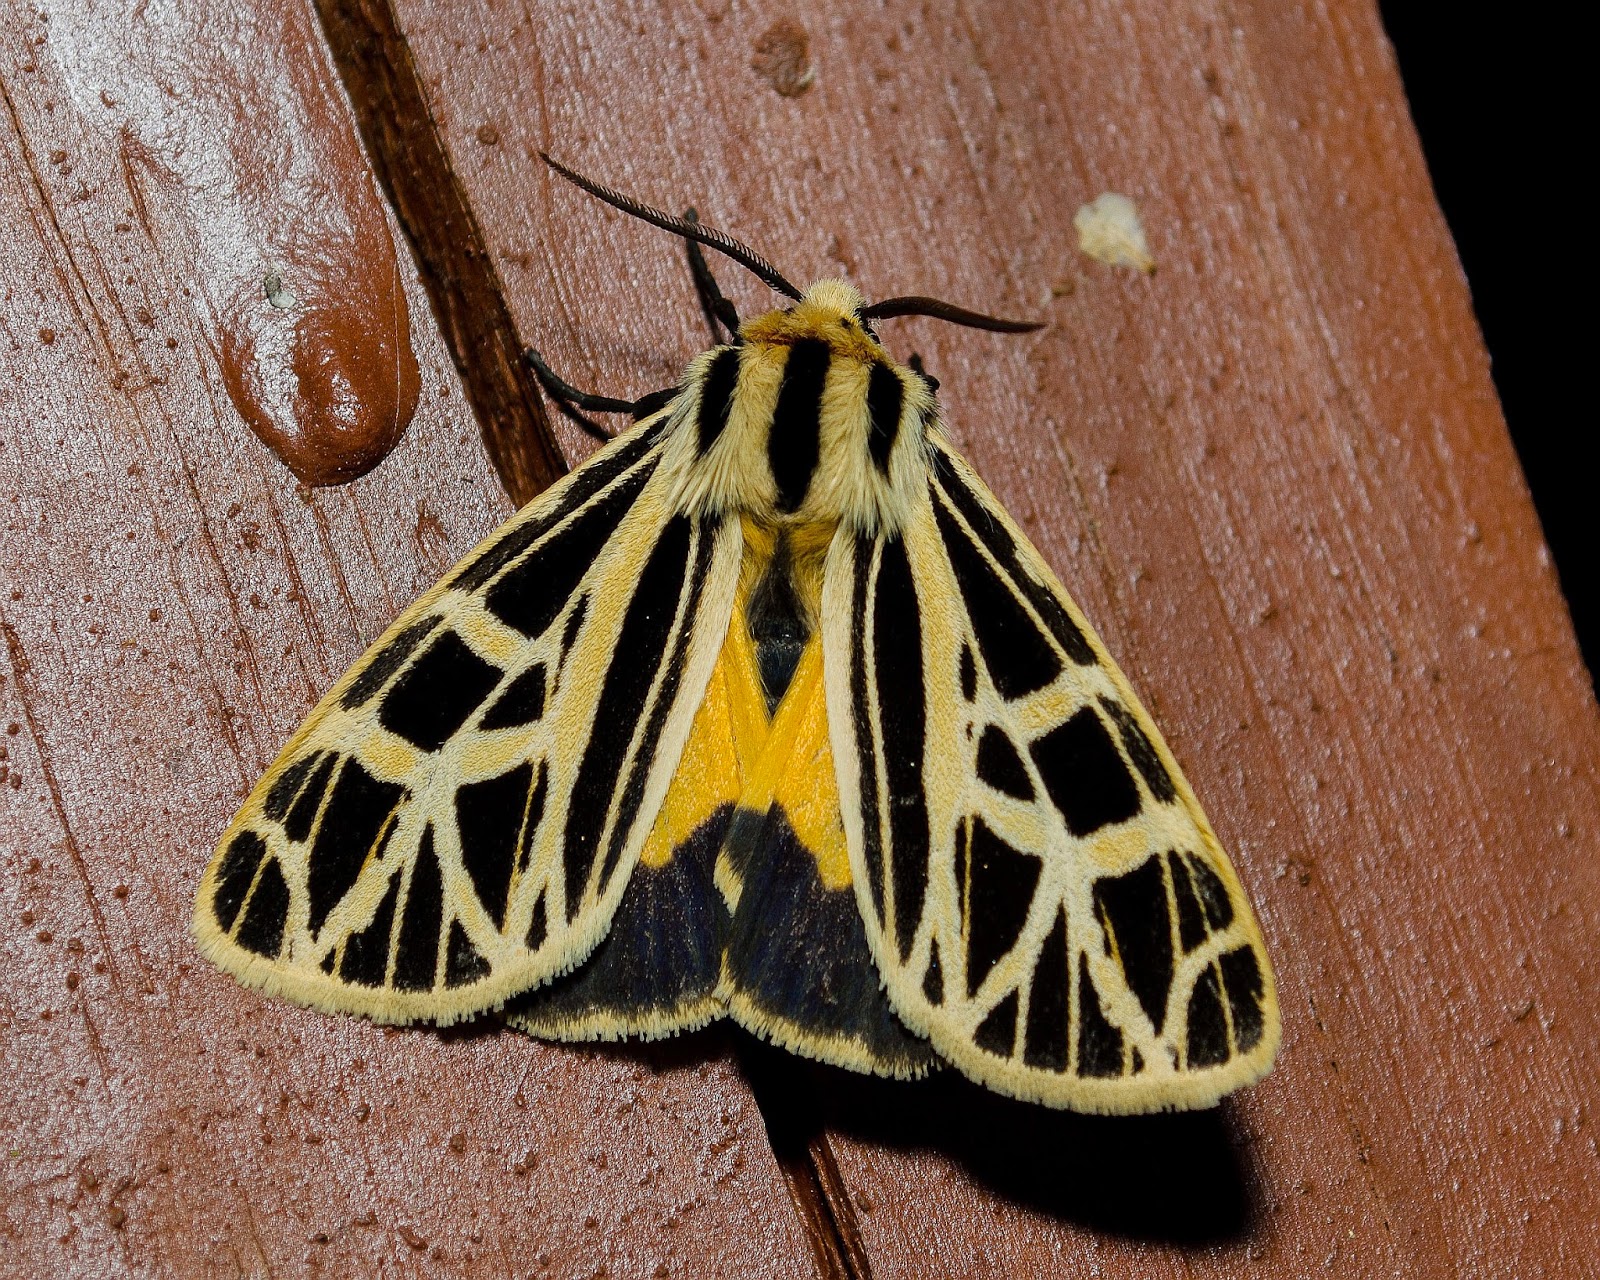 On the Subject of Nature: Some Moths, Pt. 2